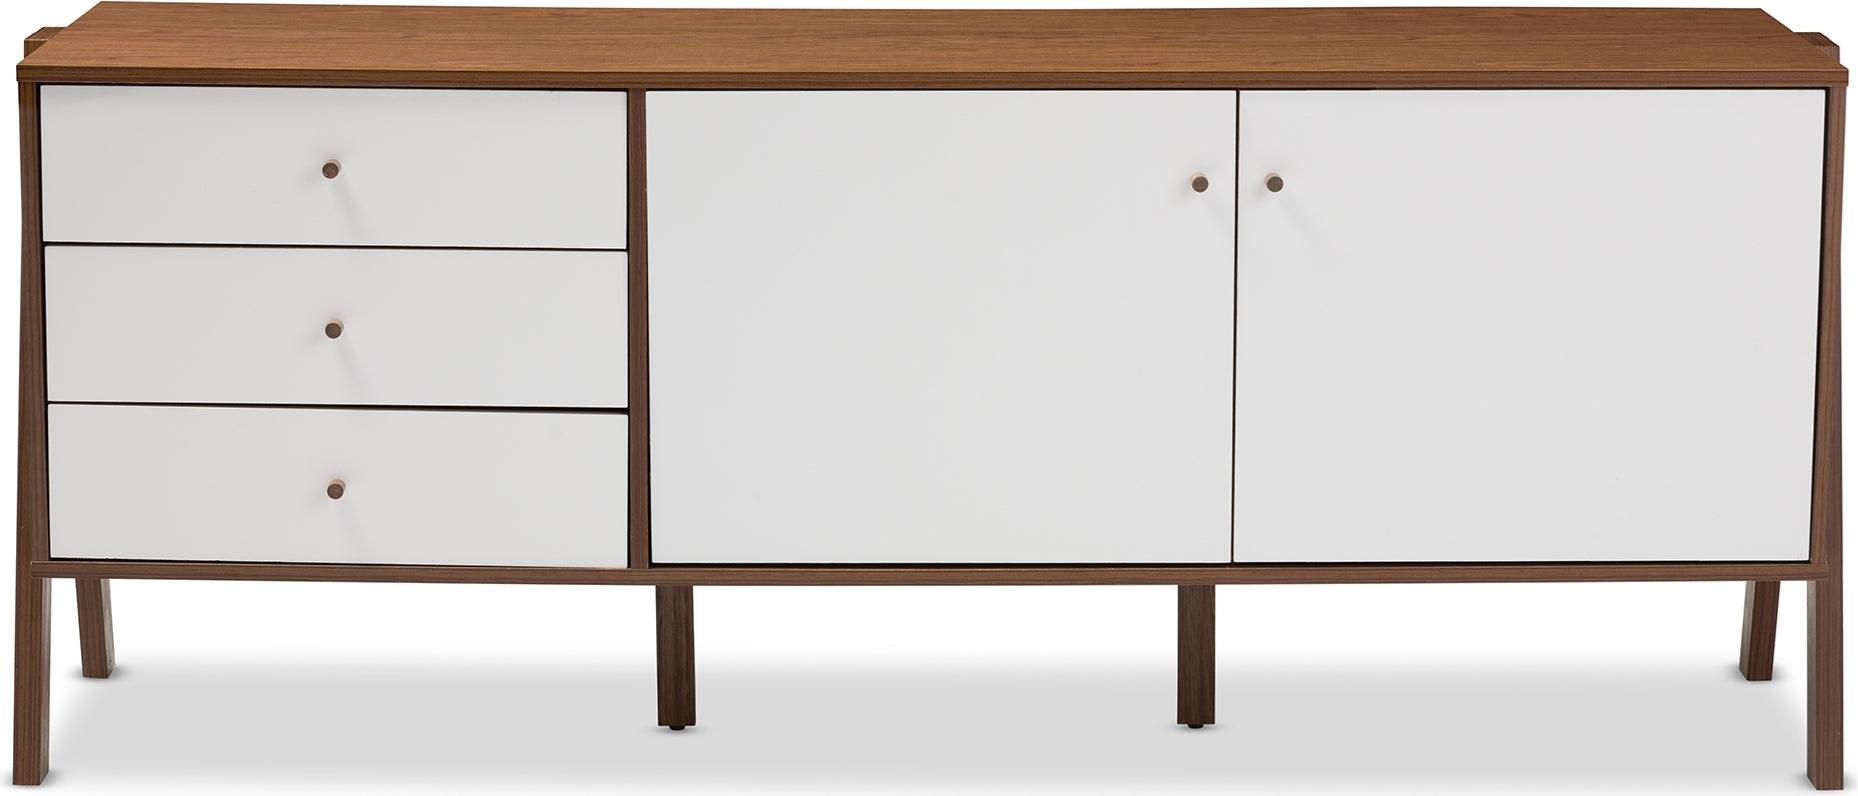 Wholesale Interiors Buffets & Sideboards - Harlow Sideboard White & Walnut